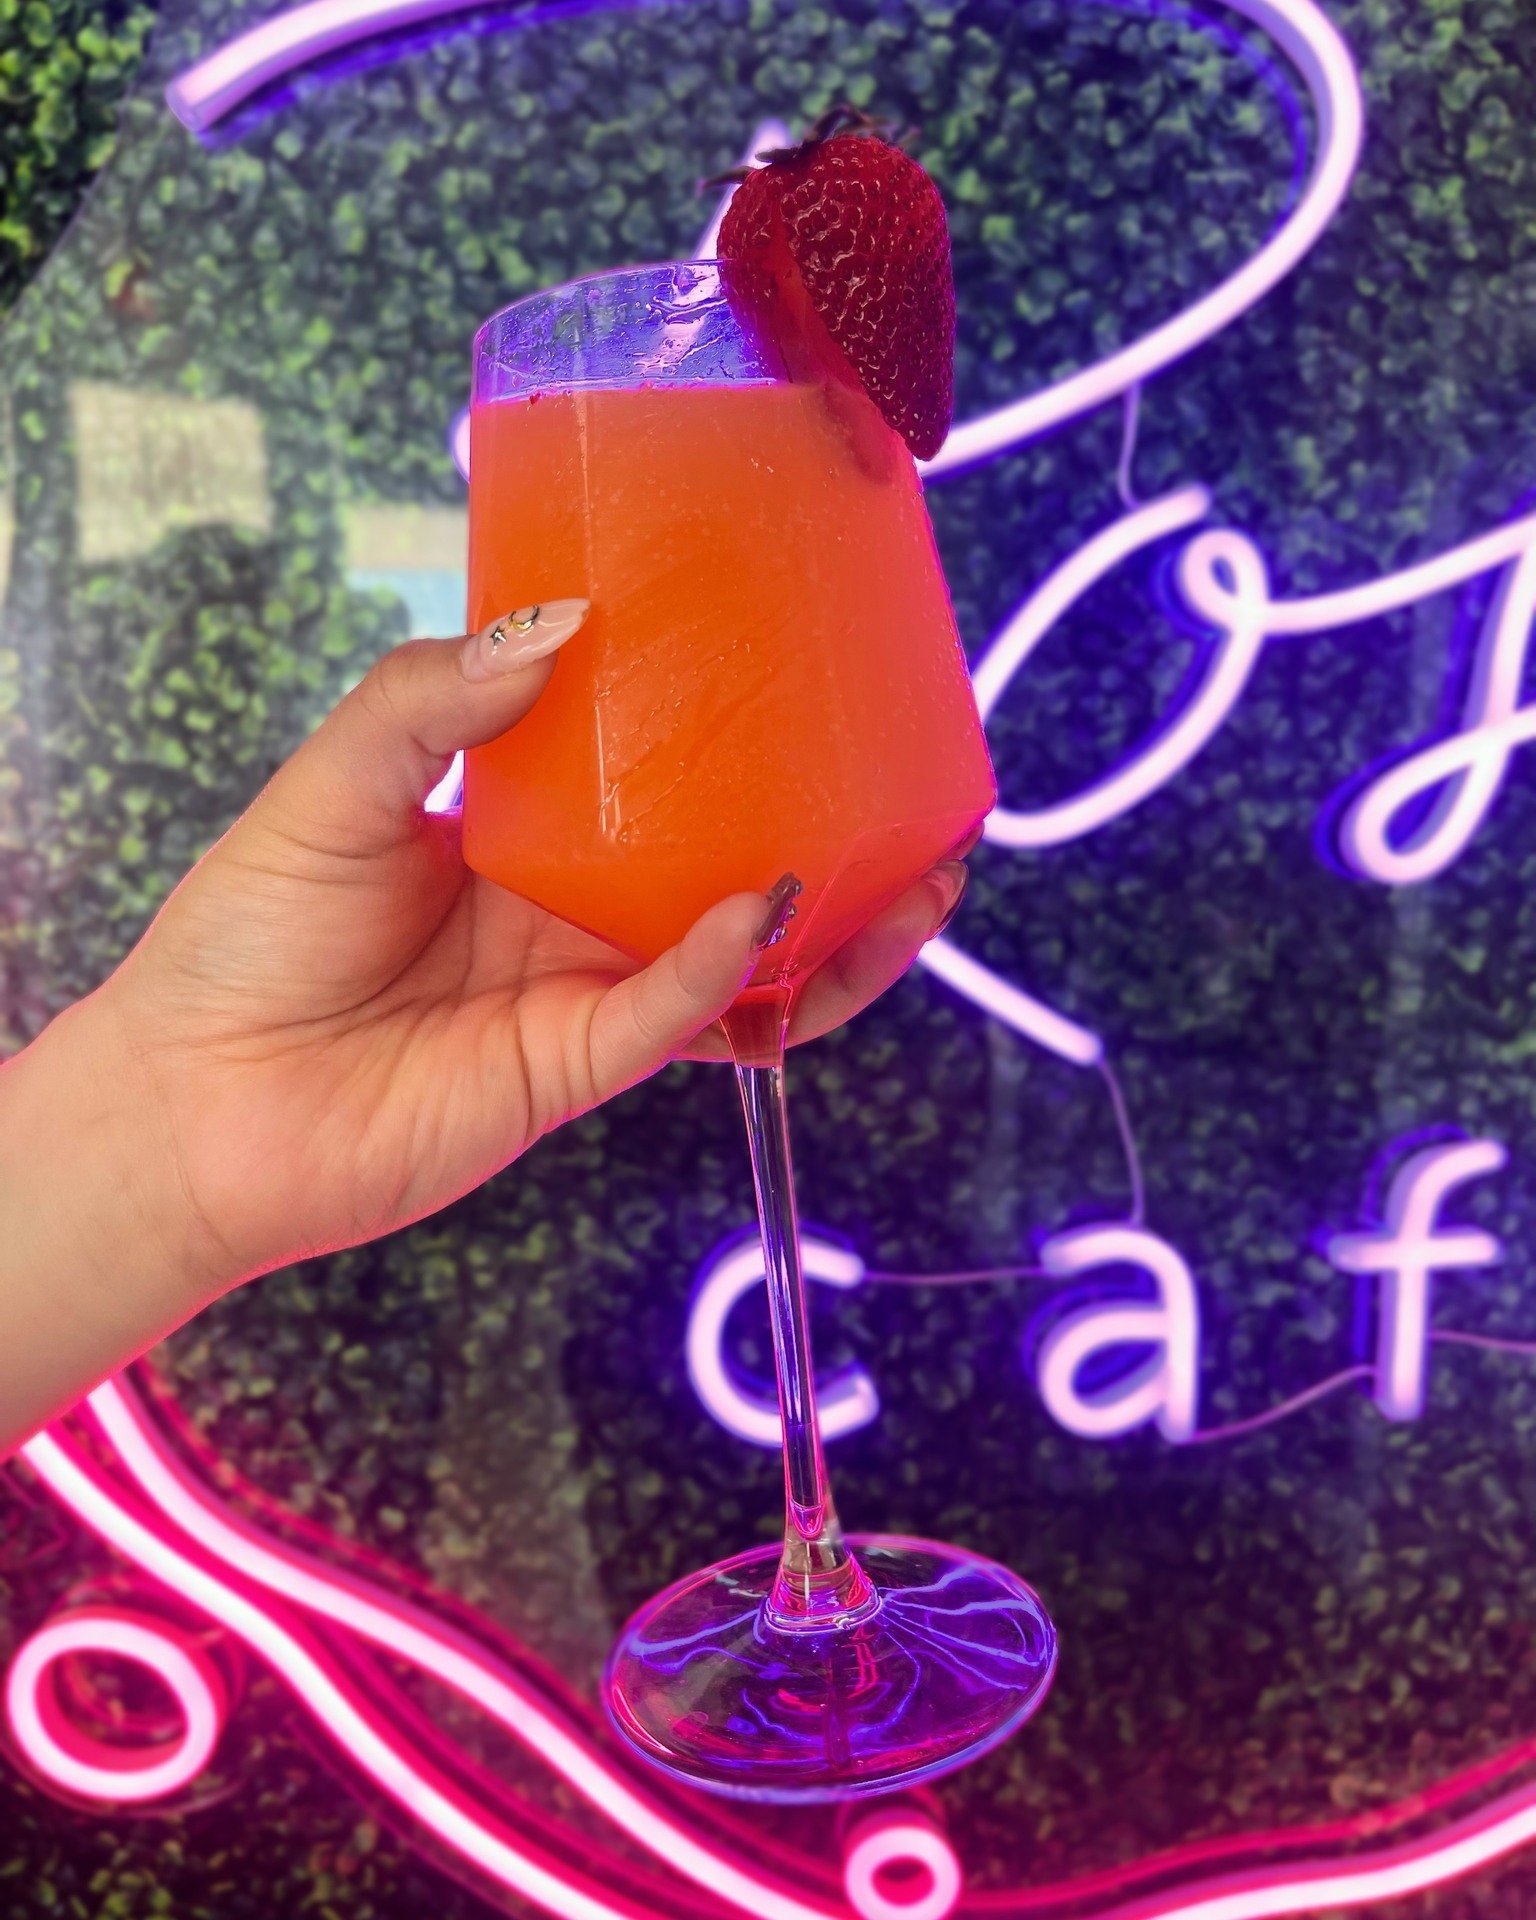 Saturday Brunch 🥂

Indulge in a delightful assortment of mimosas awaiting you! Join us for our Cinco De Mayo Brunch celebration today, featuring a vibrant selection of fiesta foods &amp; drinks. 🎉🥑🌮

Open from 9am to 2:30pm!